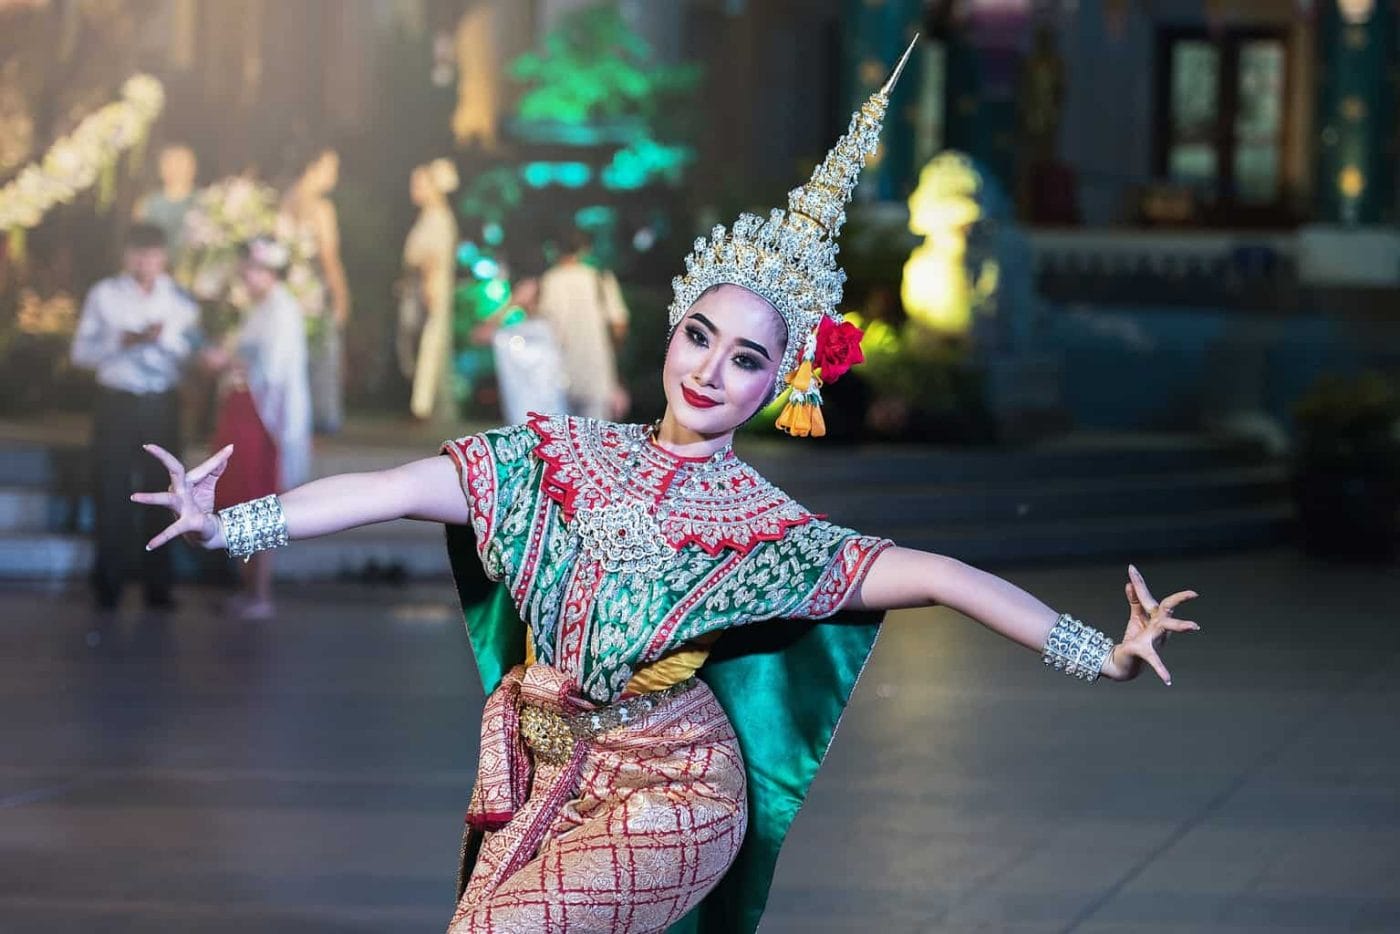 Dancer in colorful clothes and intricately designed headwear